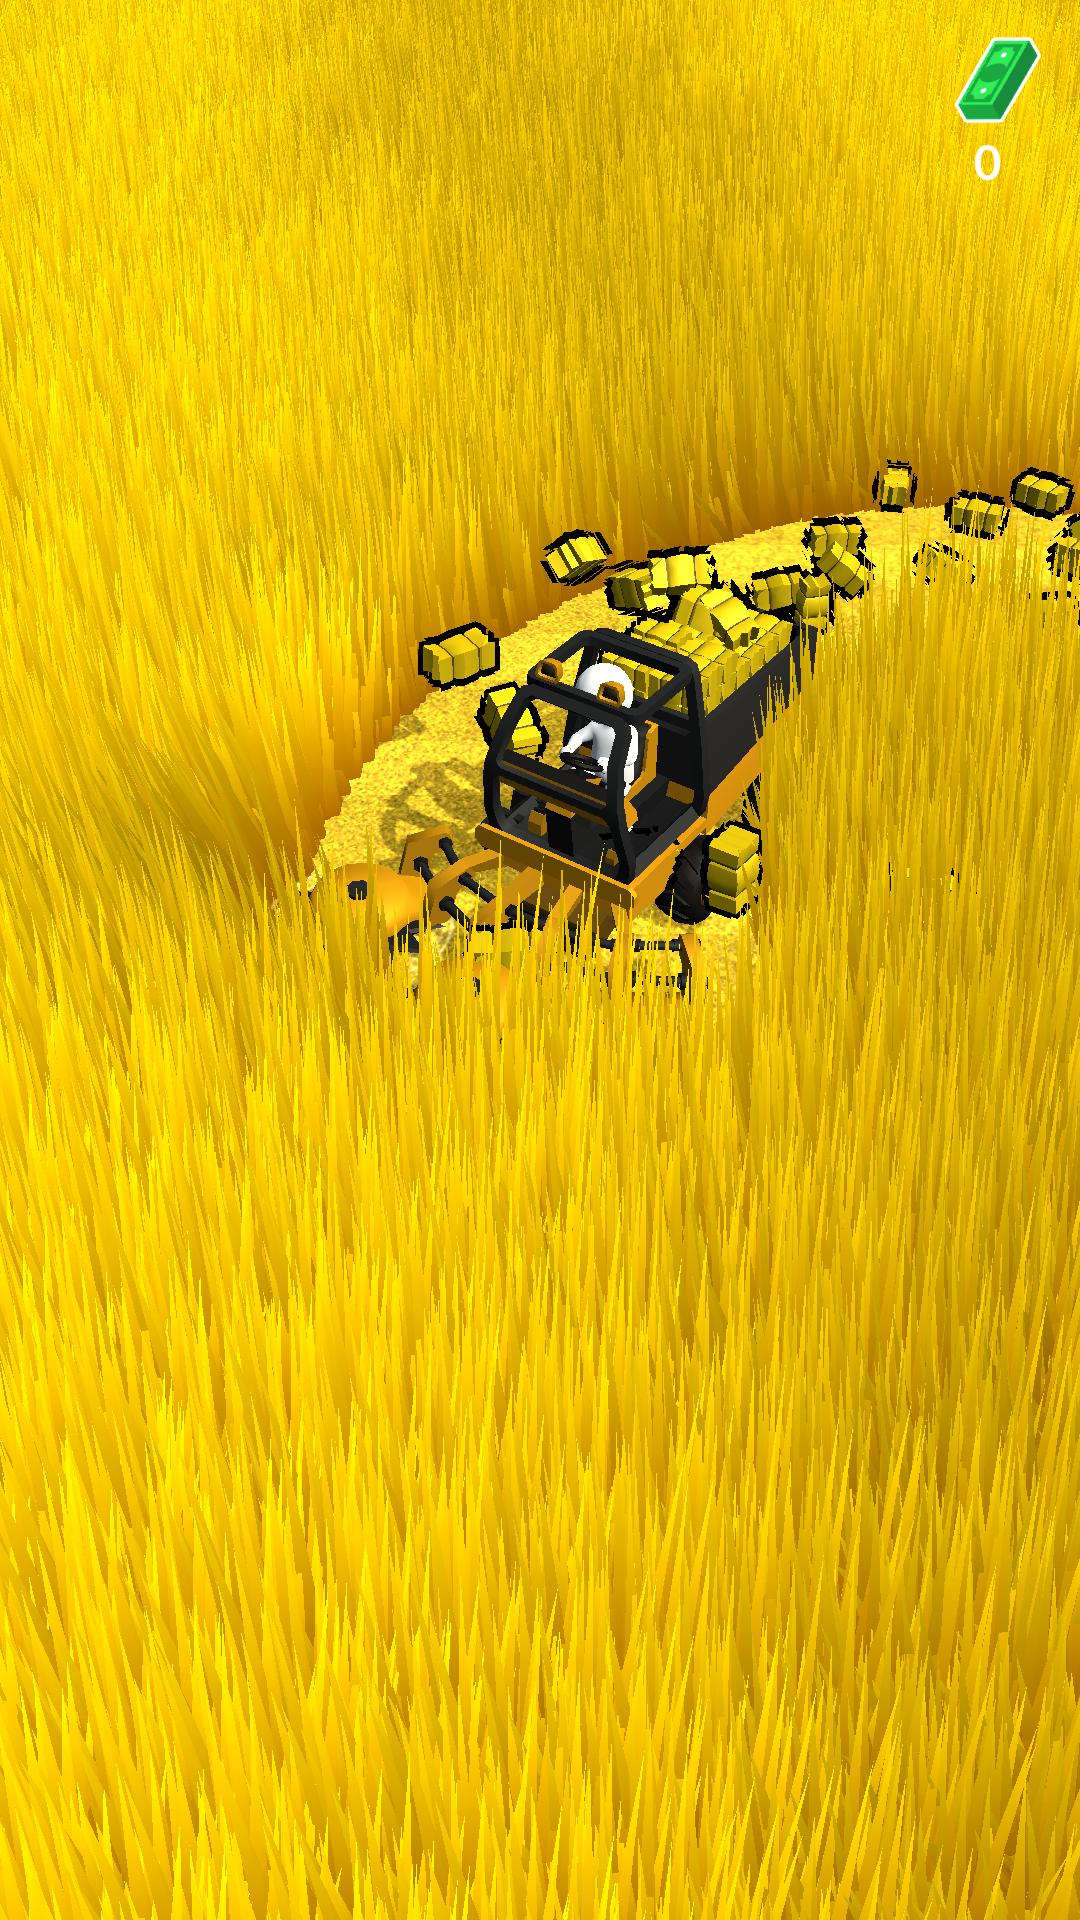 Stone Grass: Mowing Simulator - Android game screenshots.